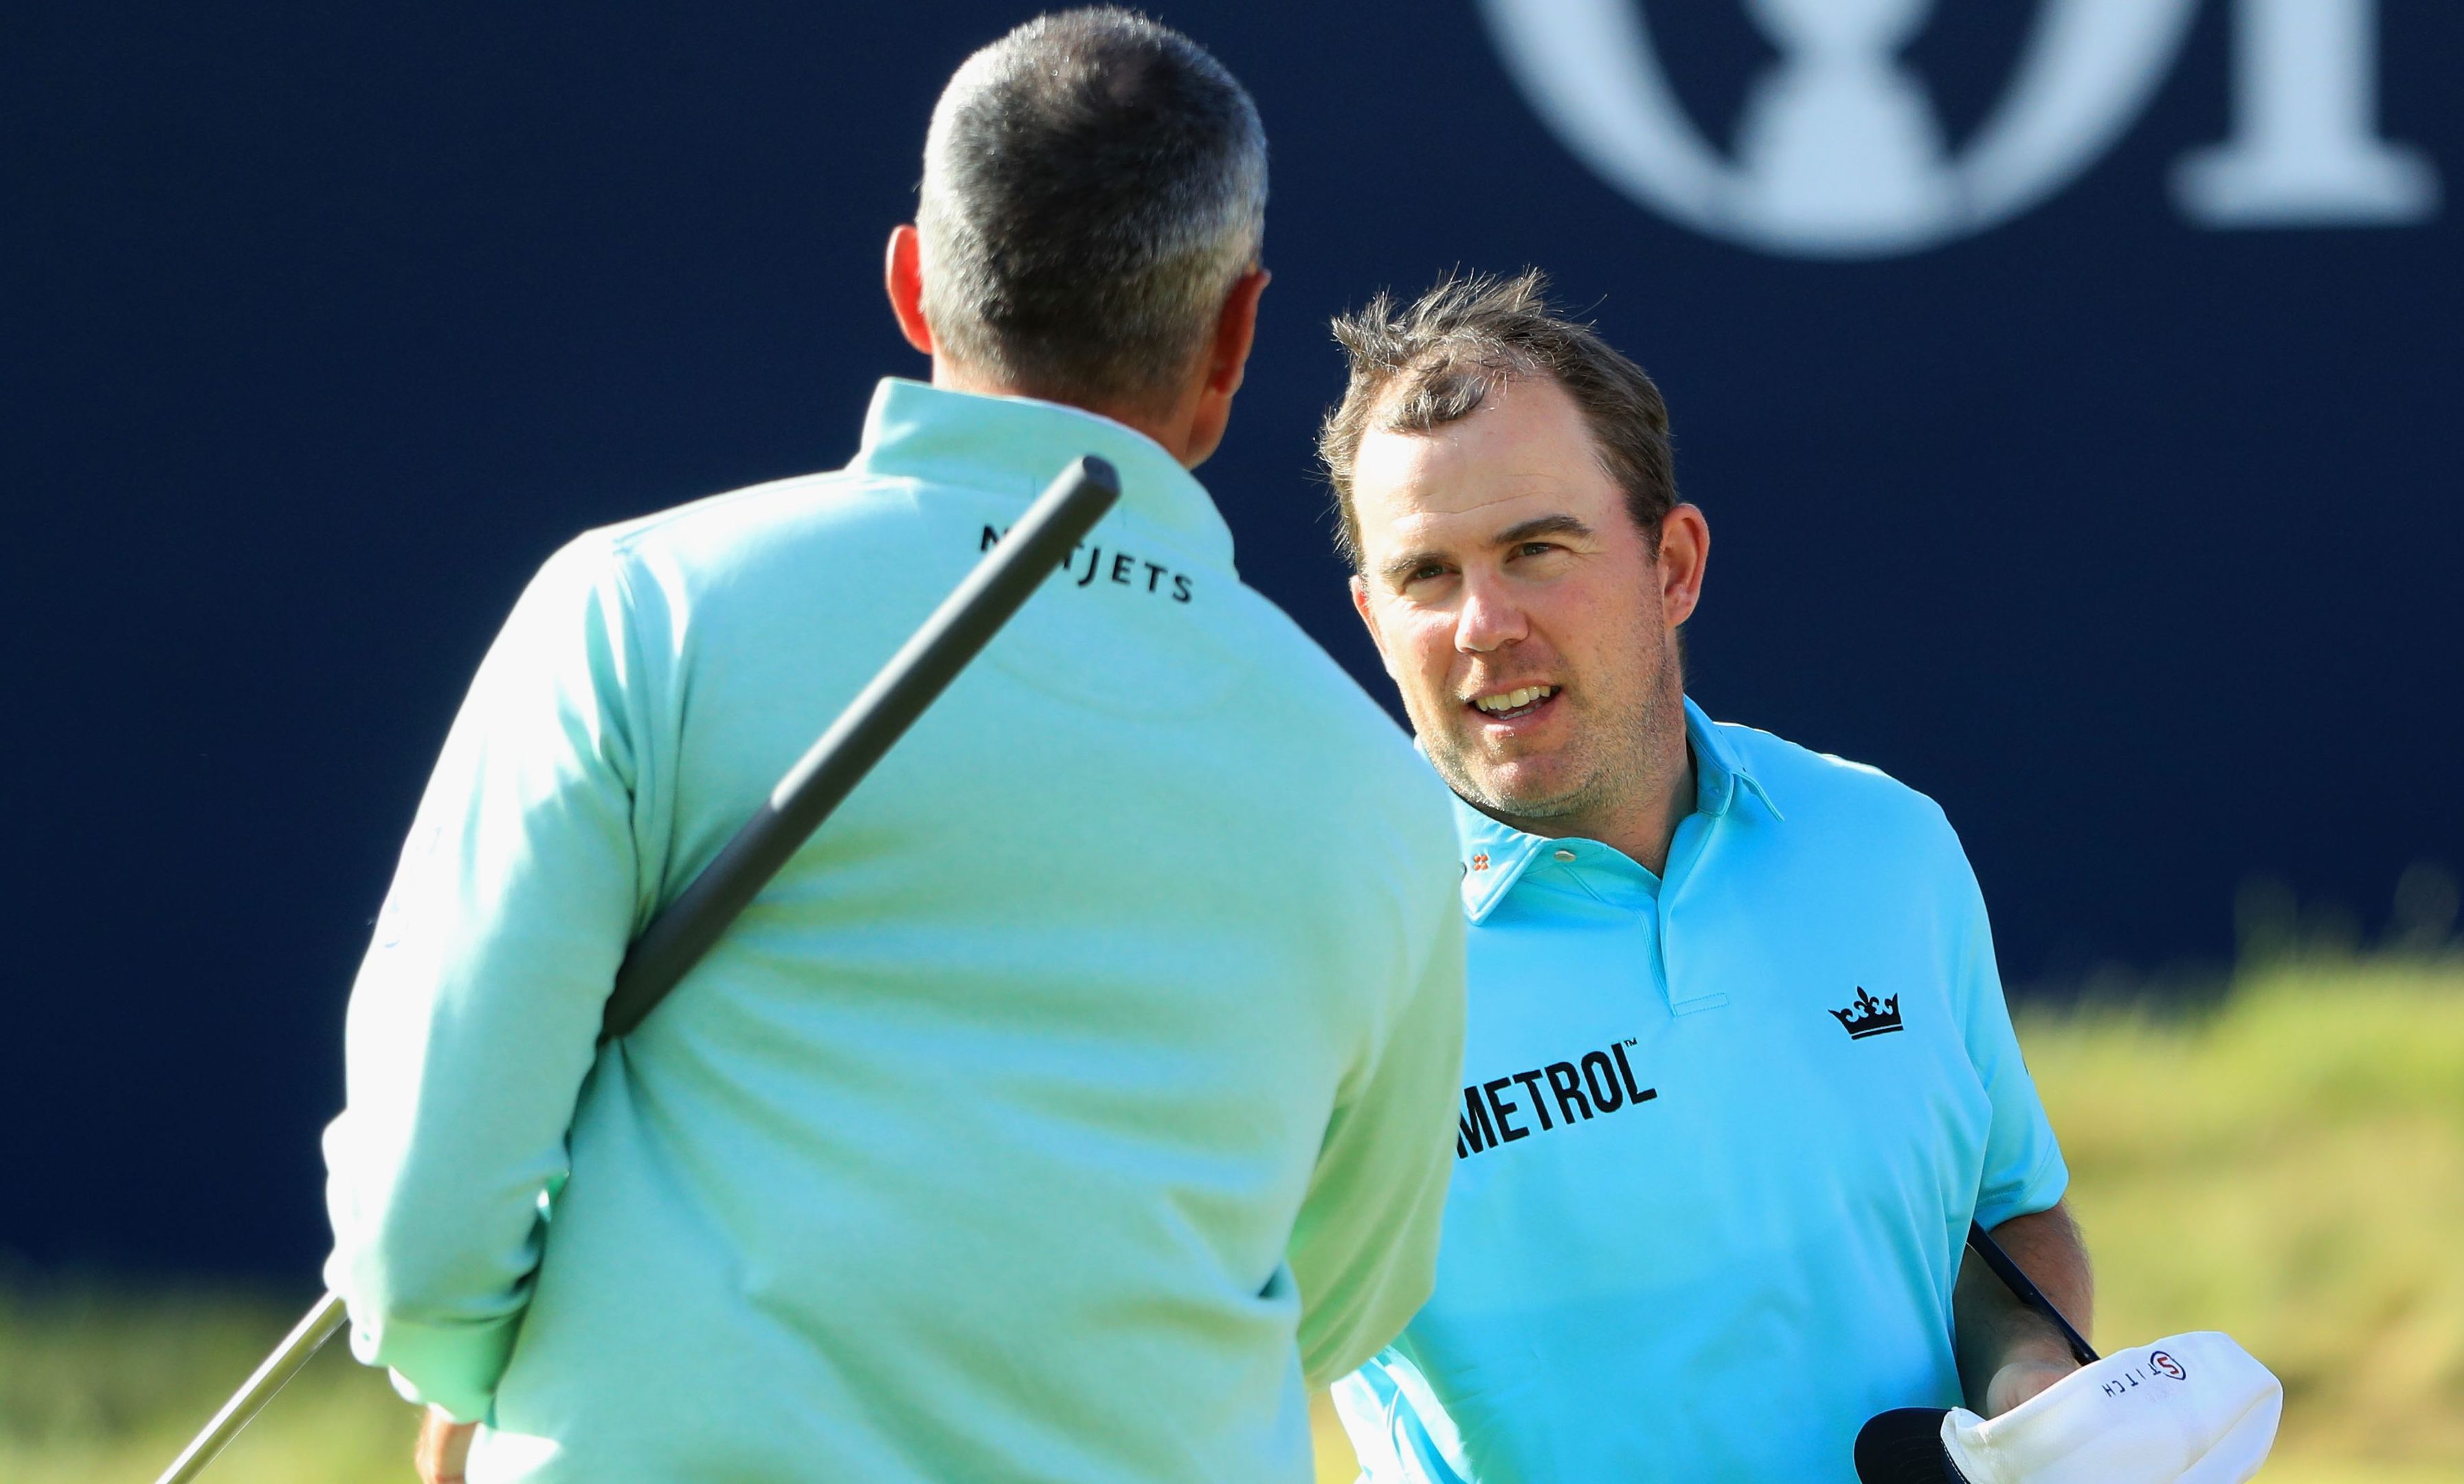 Richie Ramsay shakes hands with Matt Kuchar after their opening round.